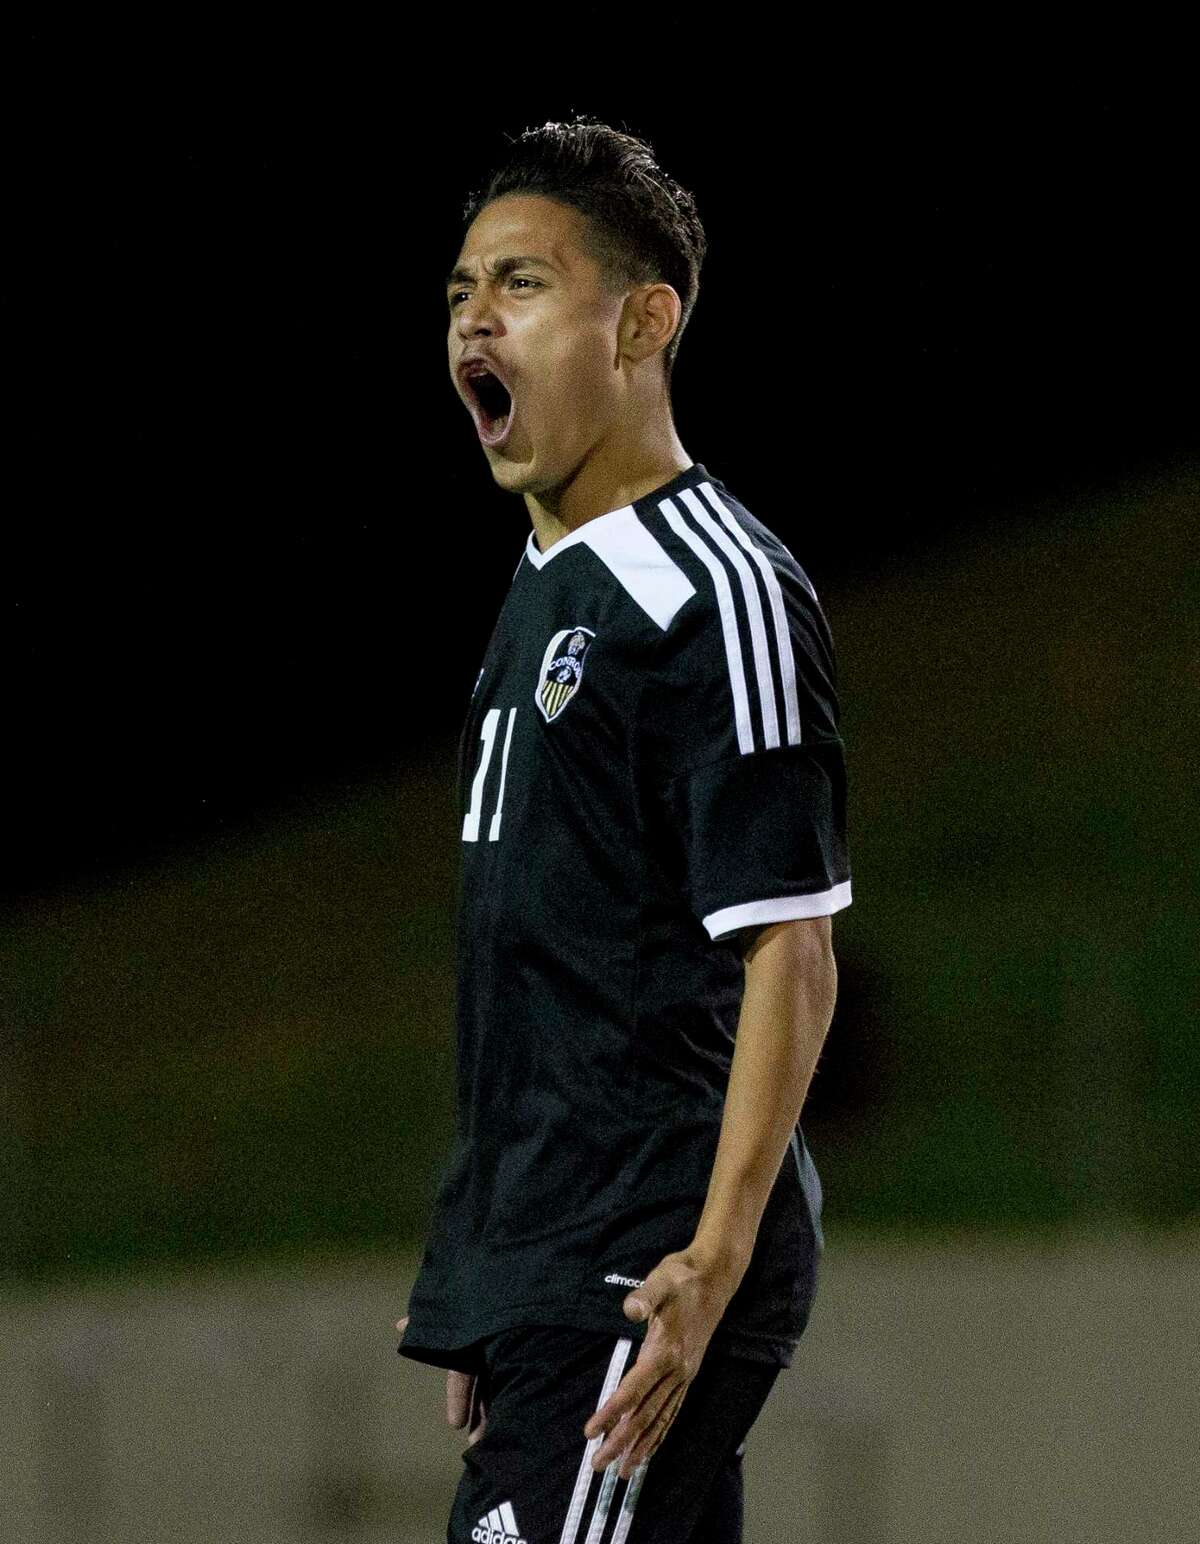 Conroe forward Danny Bonilla (11) motions toward the crowd after scoring a goal during the second period of Region II-6A bi-district high school soccer playoff match at Palestine High School Thursday, March 22, 2017, in Palestine. Rockwall defeated Conroe 2-1.